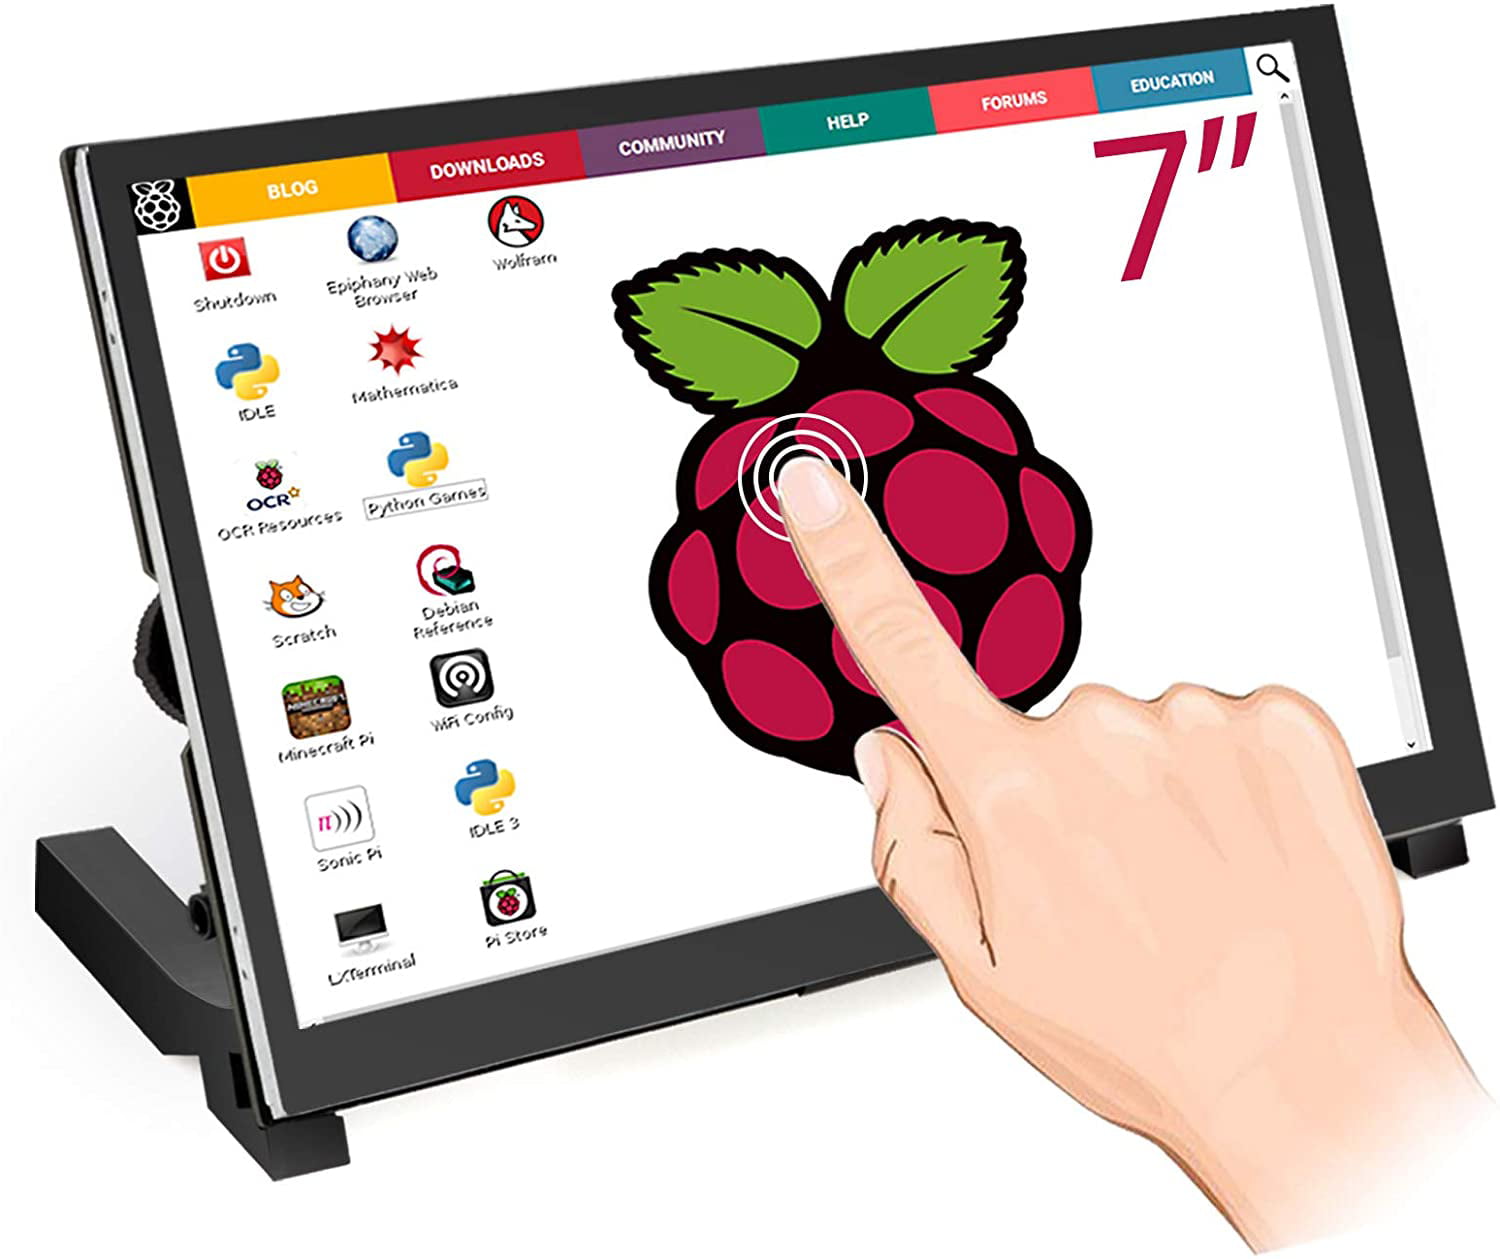 SKYSONIC Raspberry Pi Monitor Inch Touchscreen Capacitive IPS Display 1024x600 USB Powered HDMI Monitor with & Stand for Raspberry Pi Win PC - Walmart.com